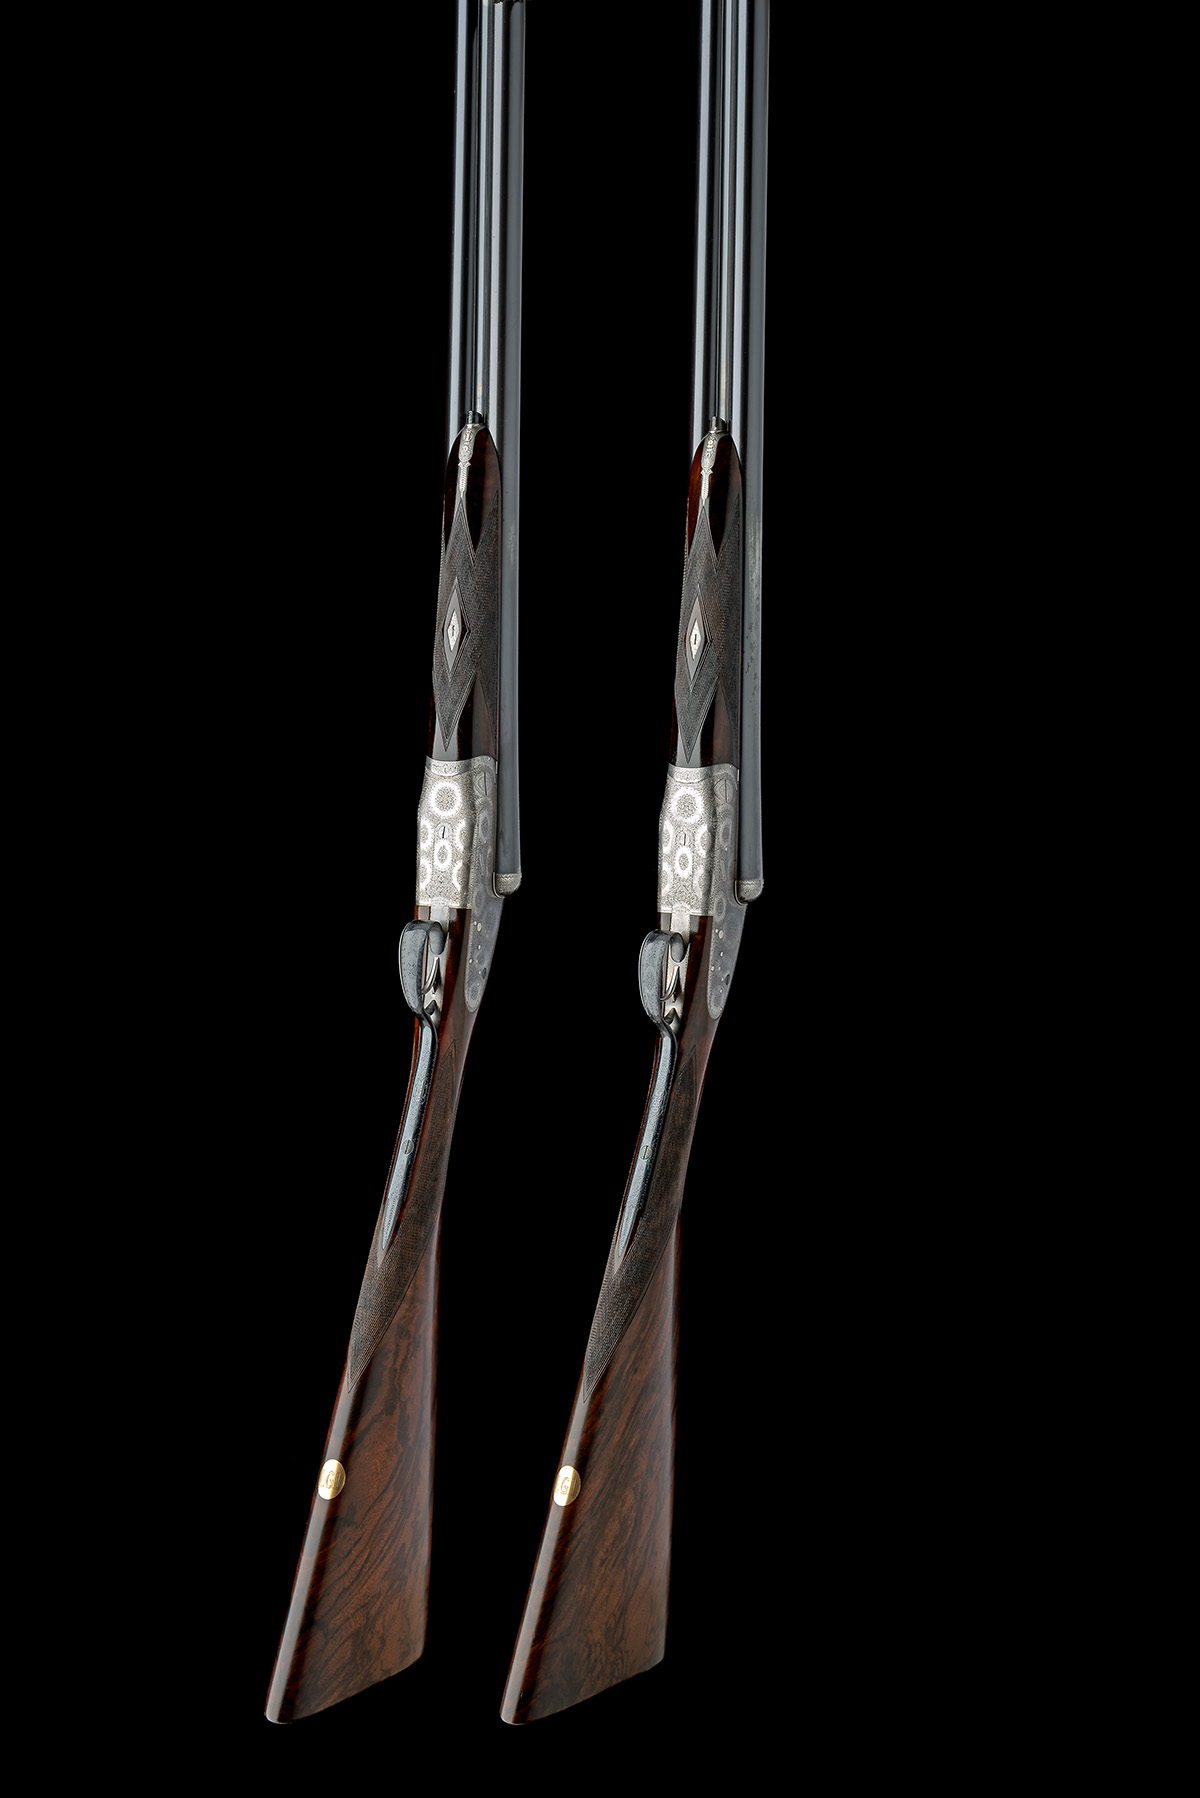 BOSS & CO. A PAIR OF 12-BORE EASY-OPENING ROUNDED-BAR SINGLE-TRIGGER SIDELOCK EJECTORS, serial no. - Image 8 of 11